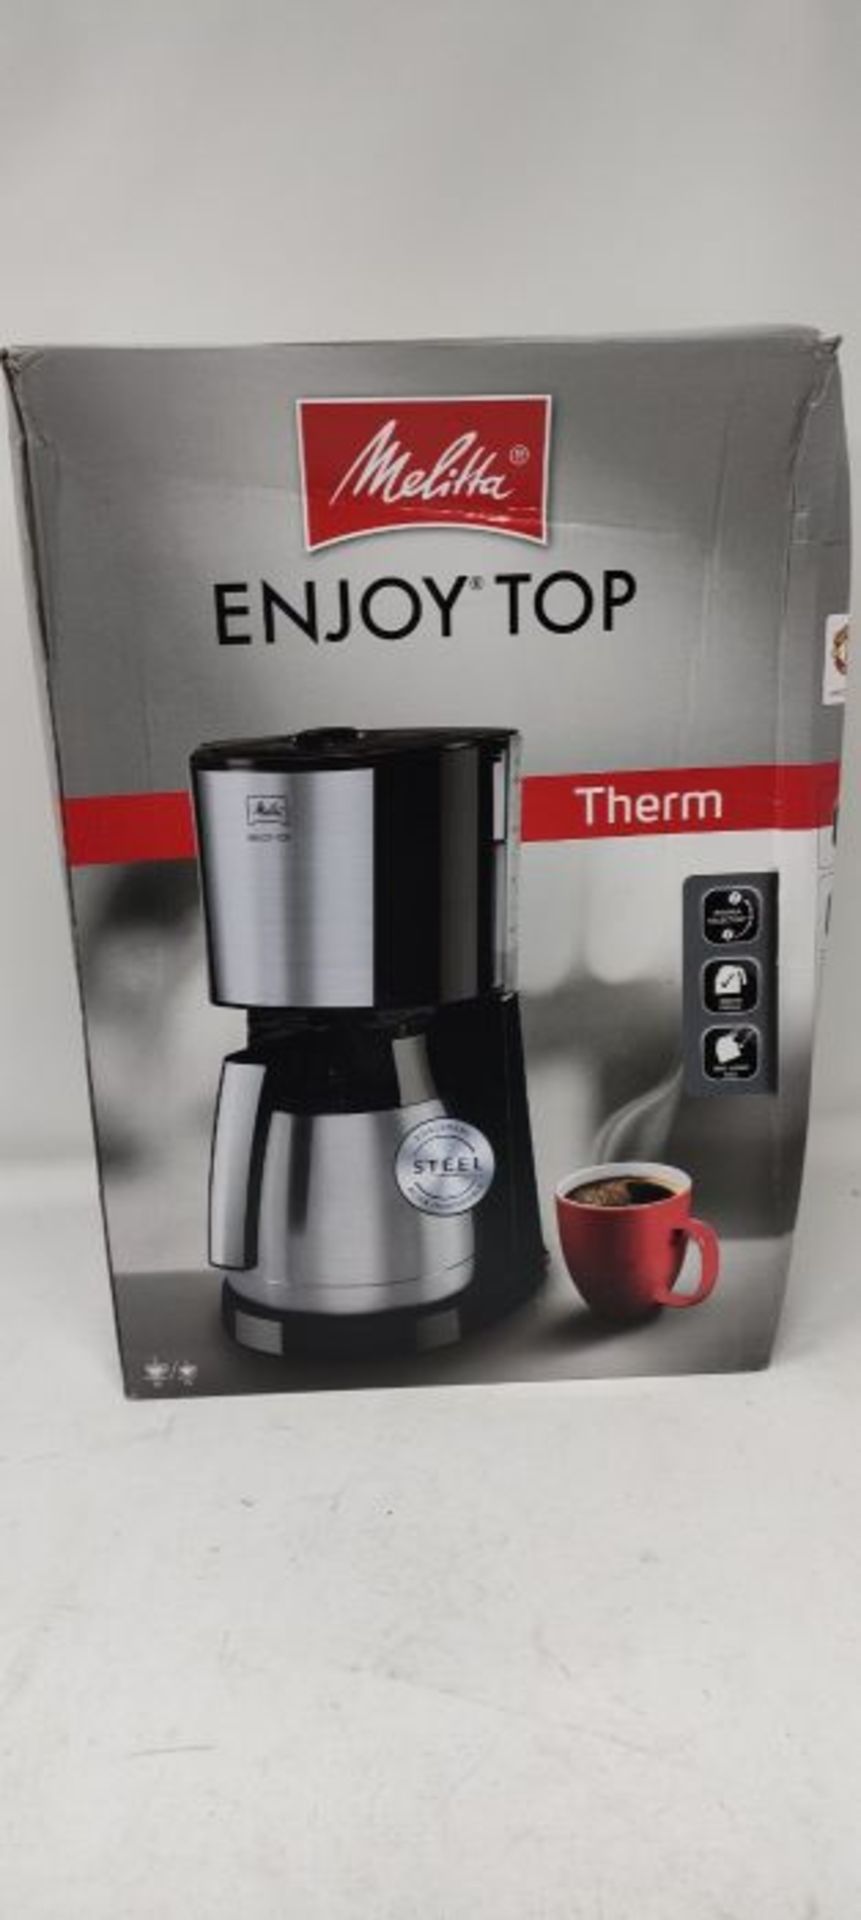 RRP £51.00 Melitta Enjoy Top Therm, 1017-08, Coffee Machine with Insulated Stainless Steel Jug, A